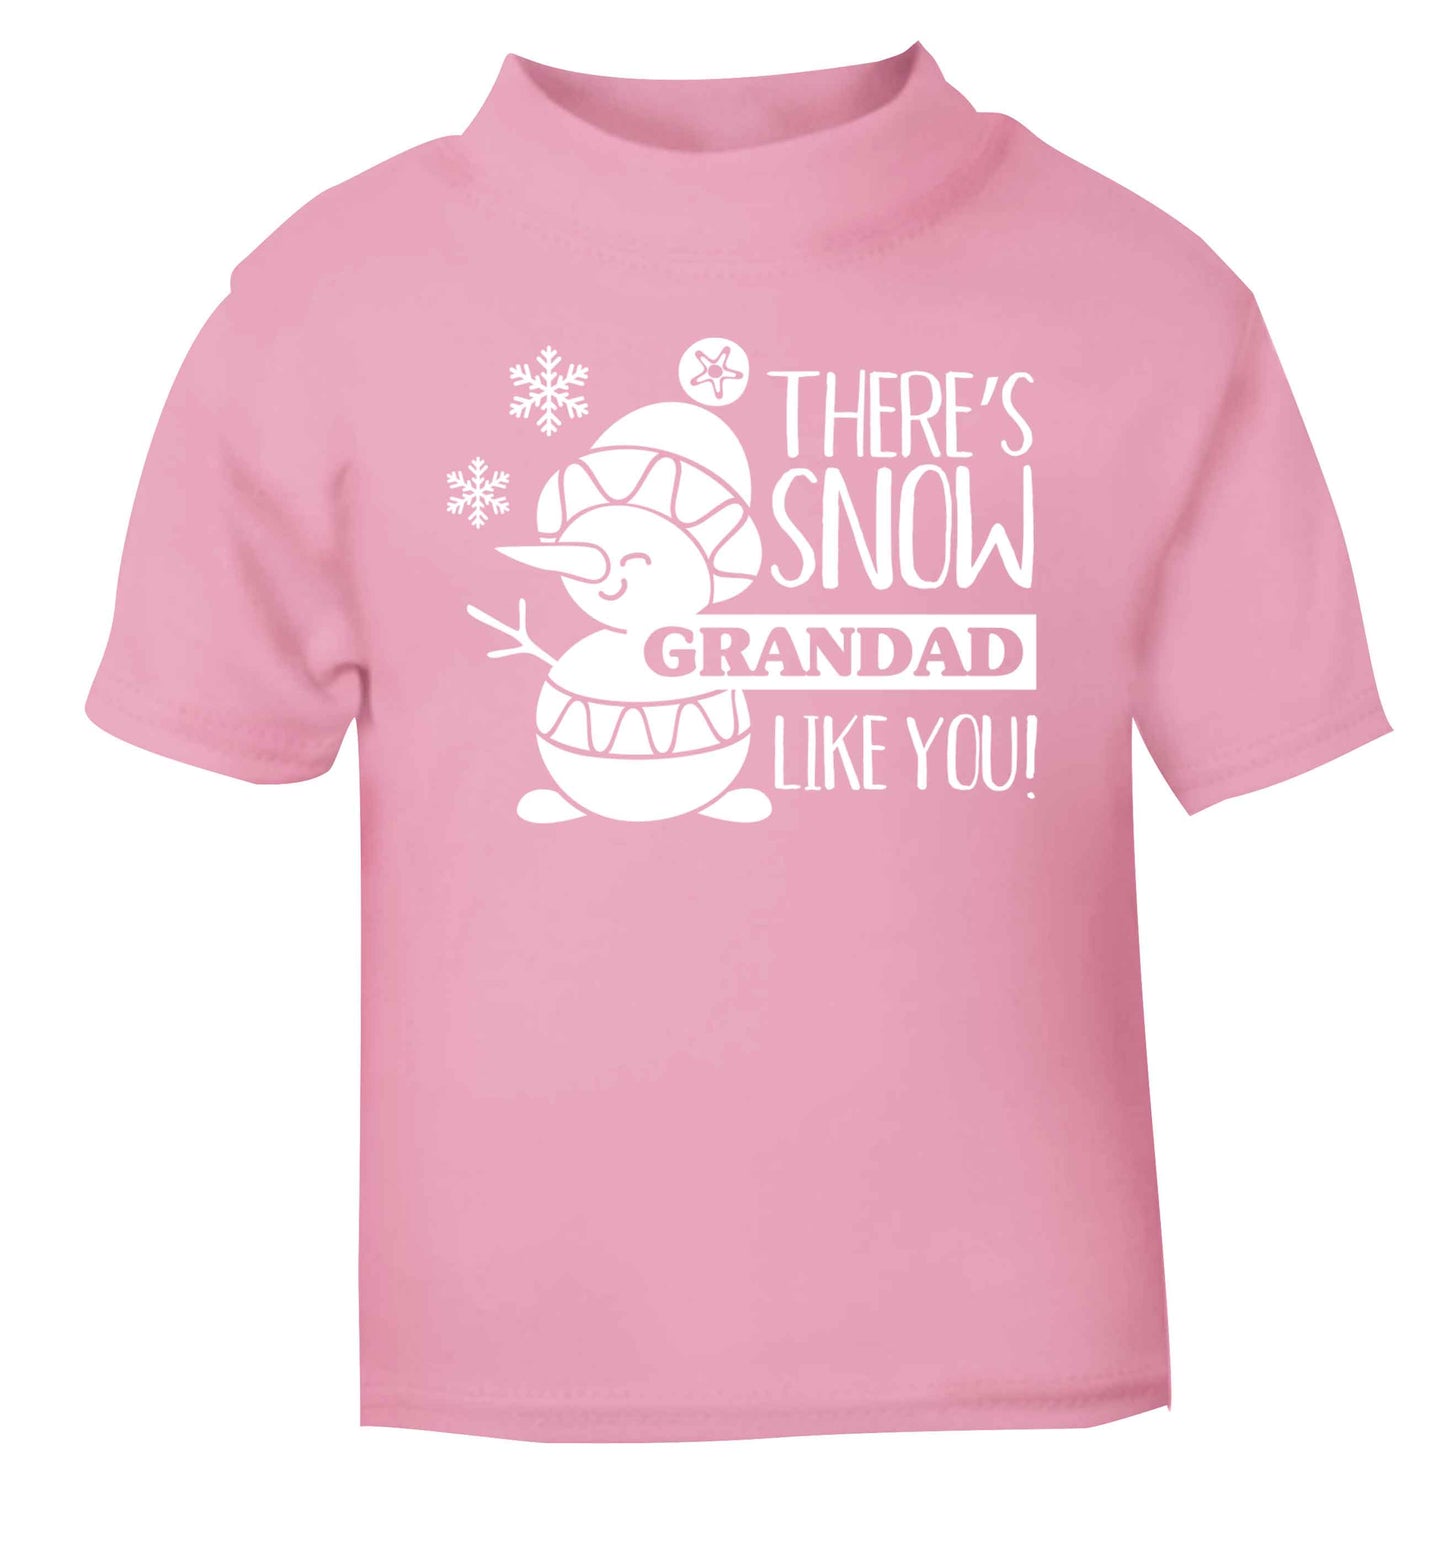 There's snow grandad like you light pink baby toddler Tshirt 2 Years